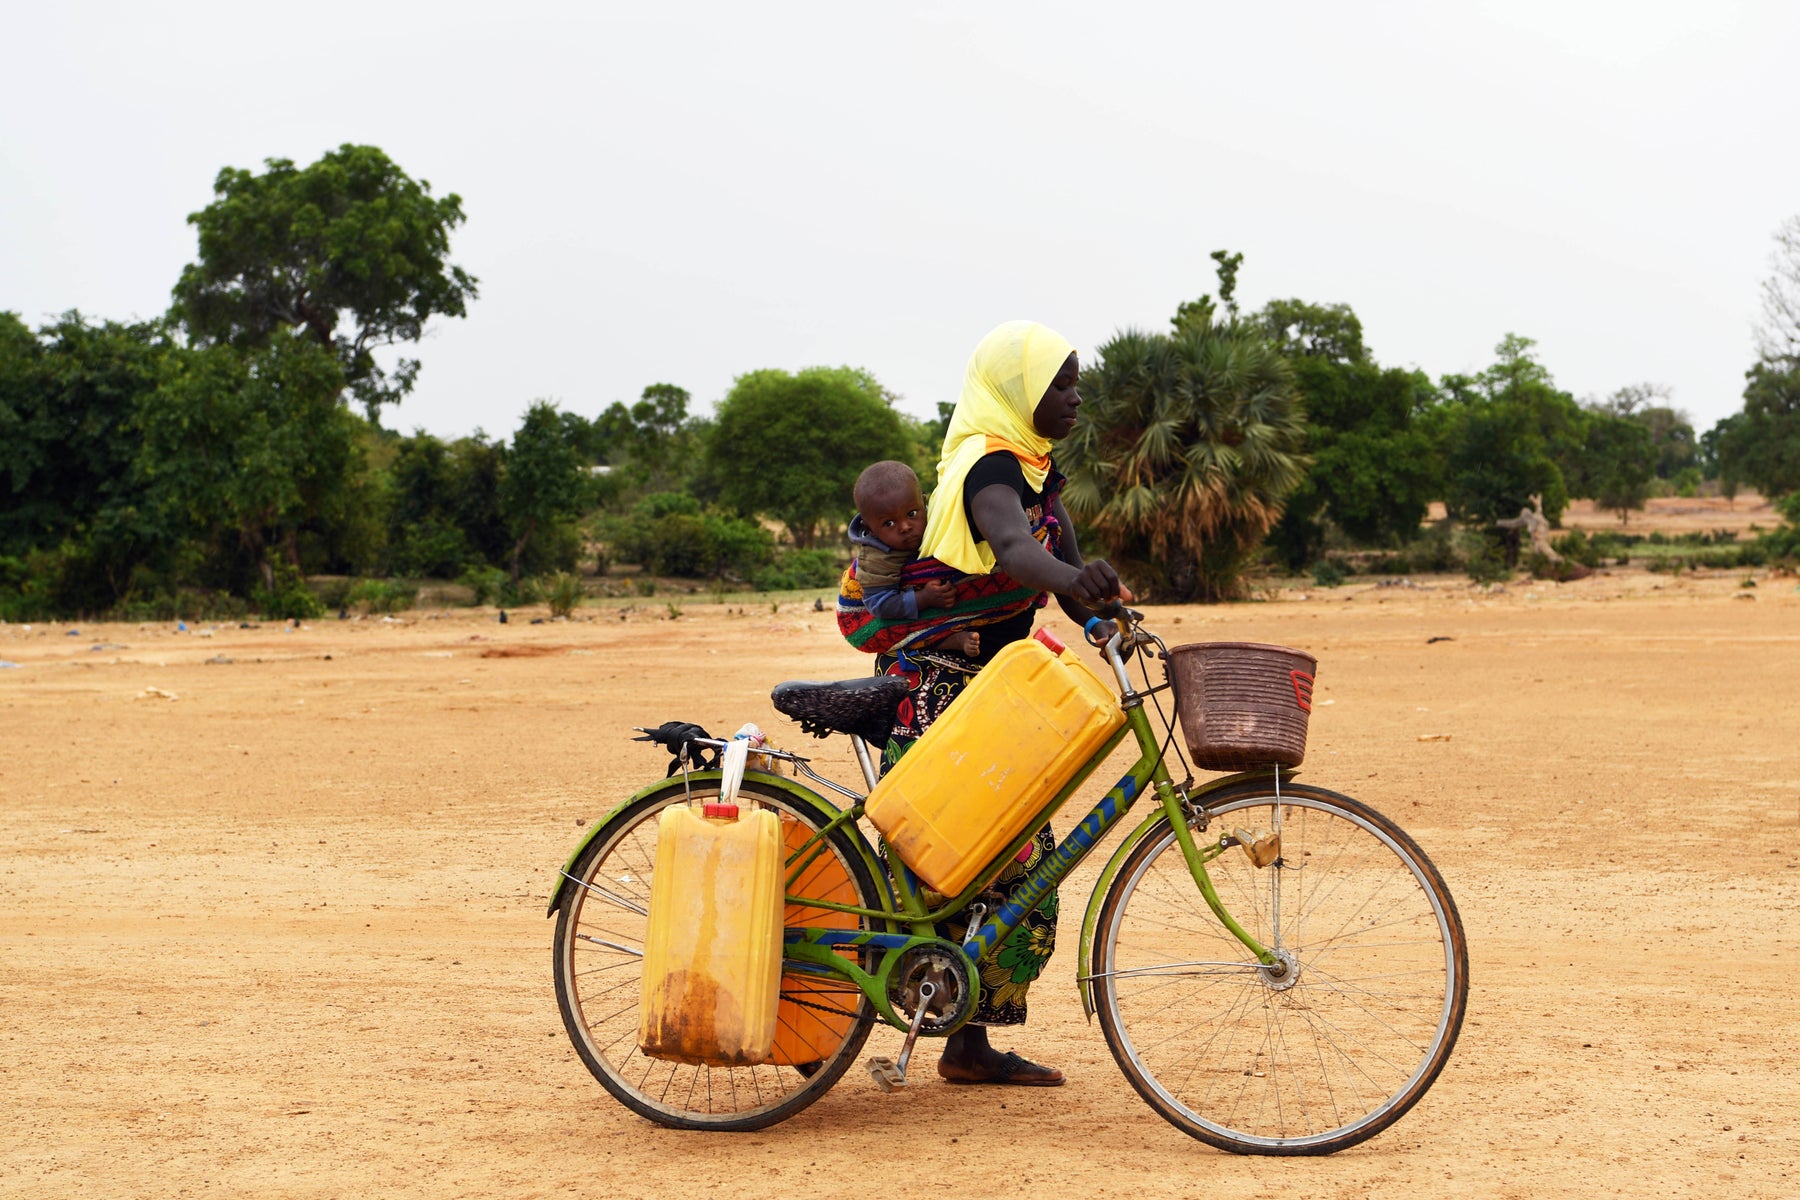 Mother and child on bike to collect water